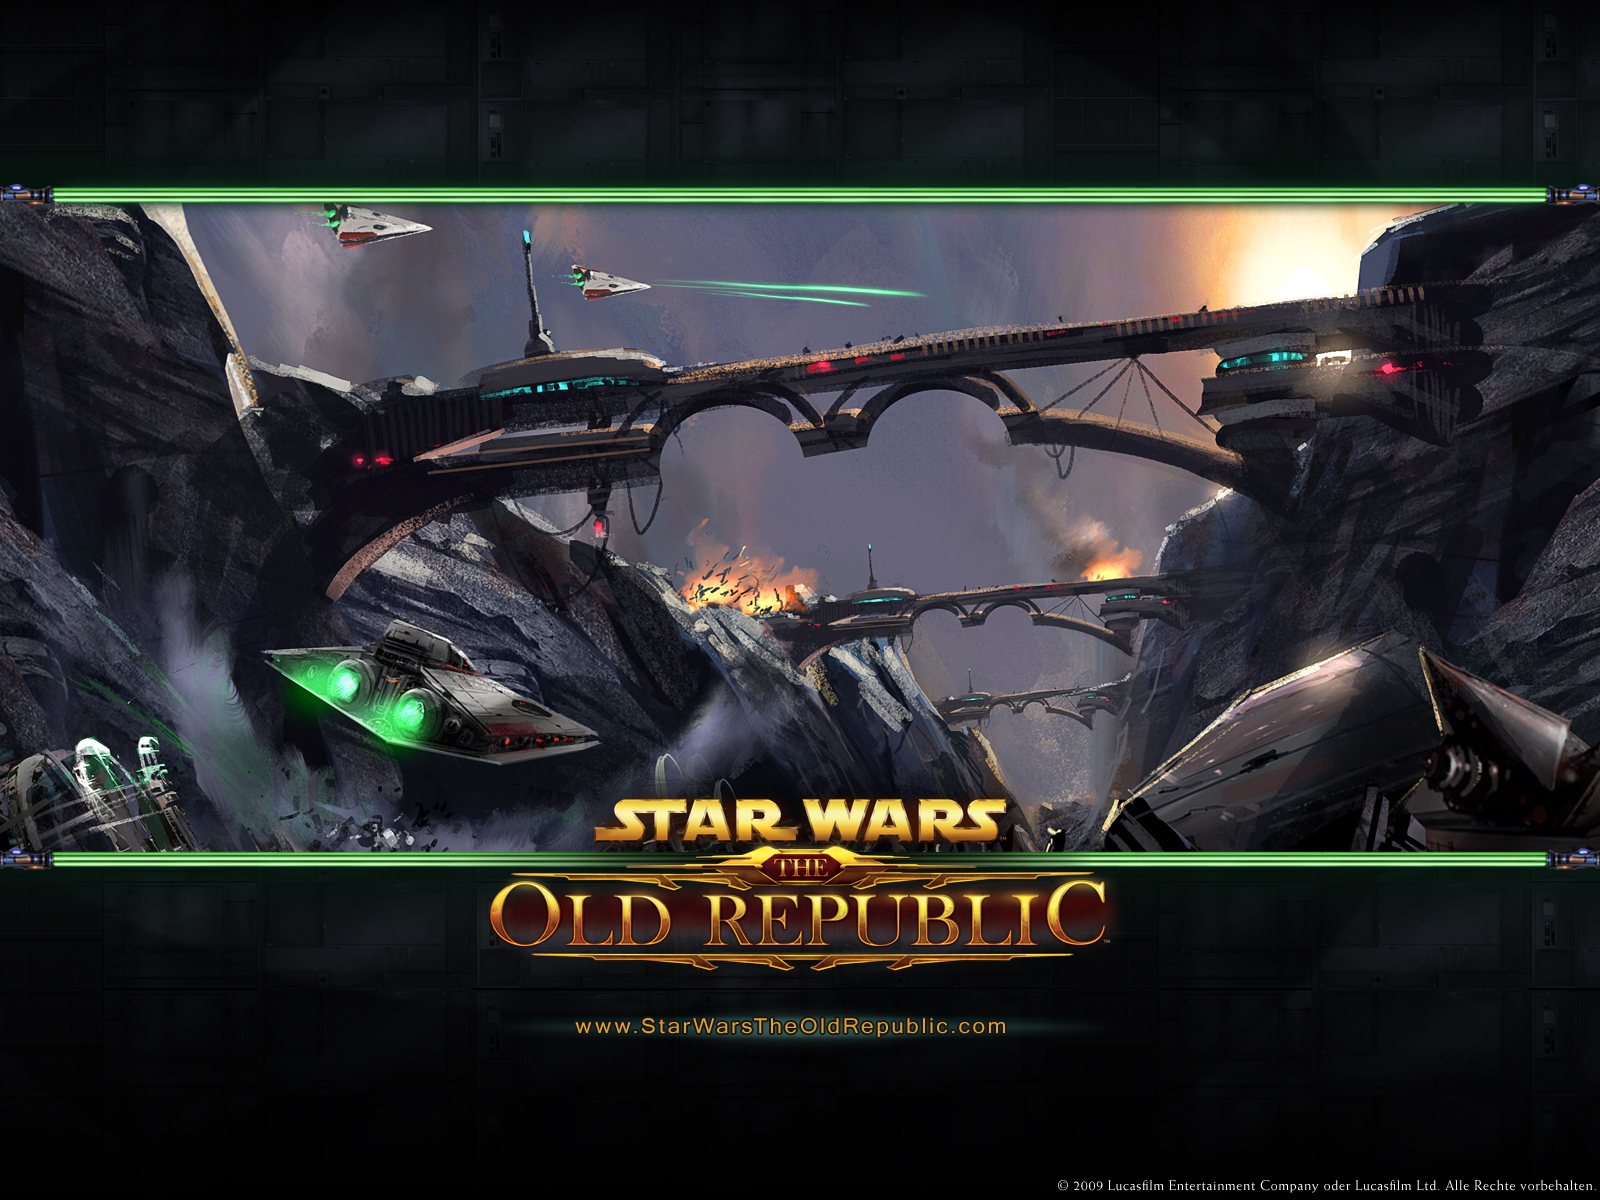 Who Are You in Star Wars: The Old Republic?